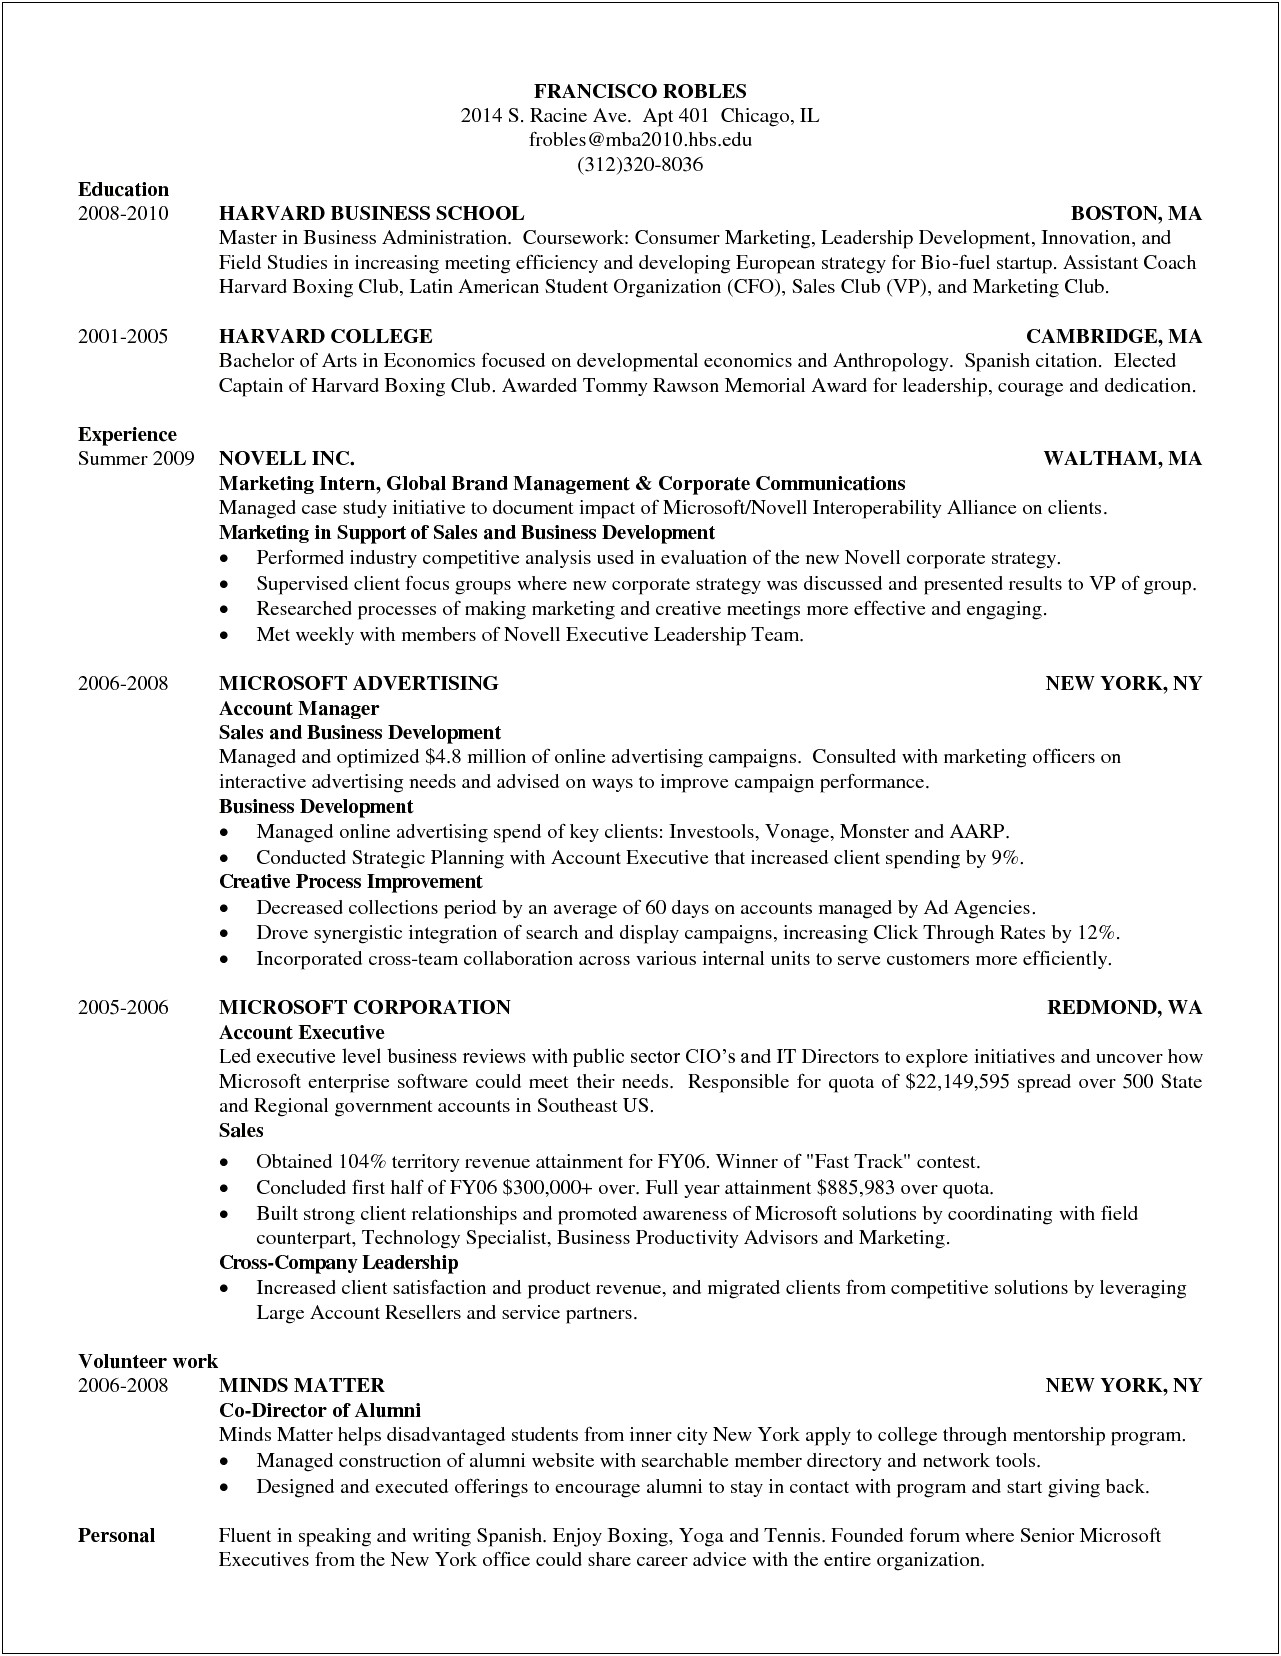 Put Mba In Business School Resume